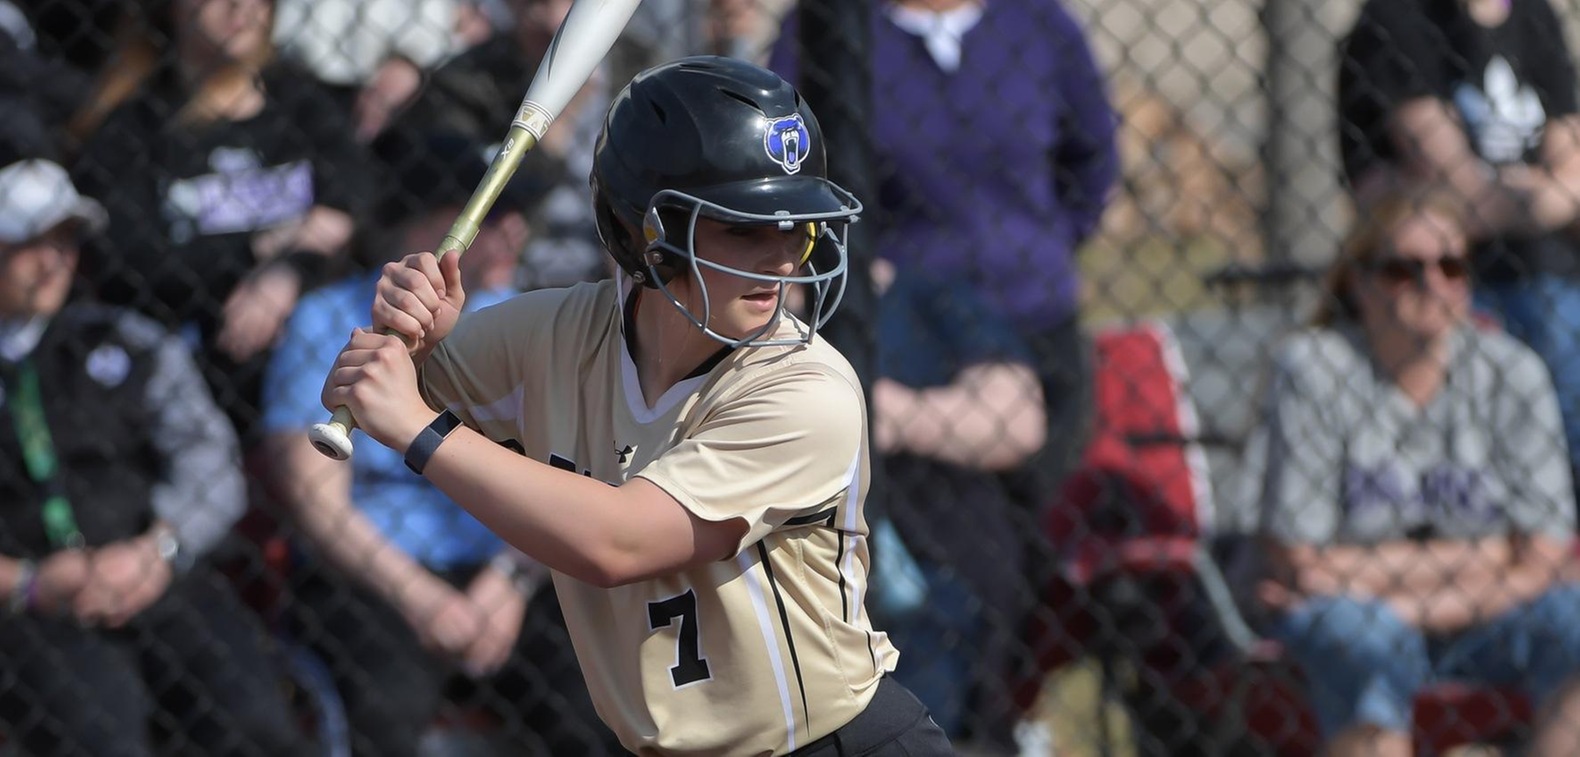 Emily Mendick recorded her first career home run in the loss to Calumet.